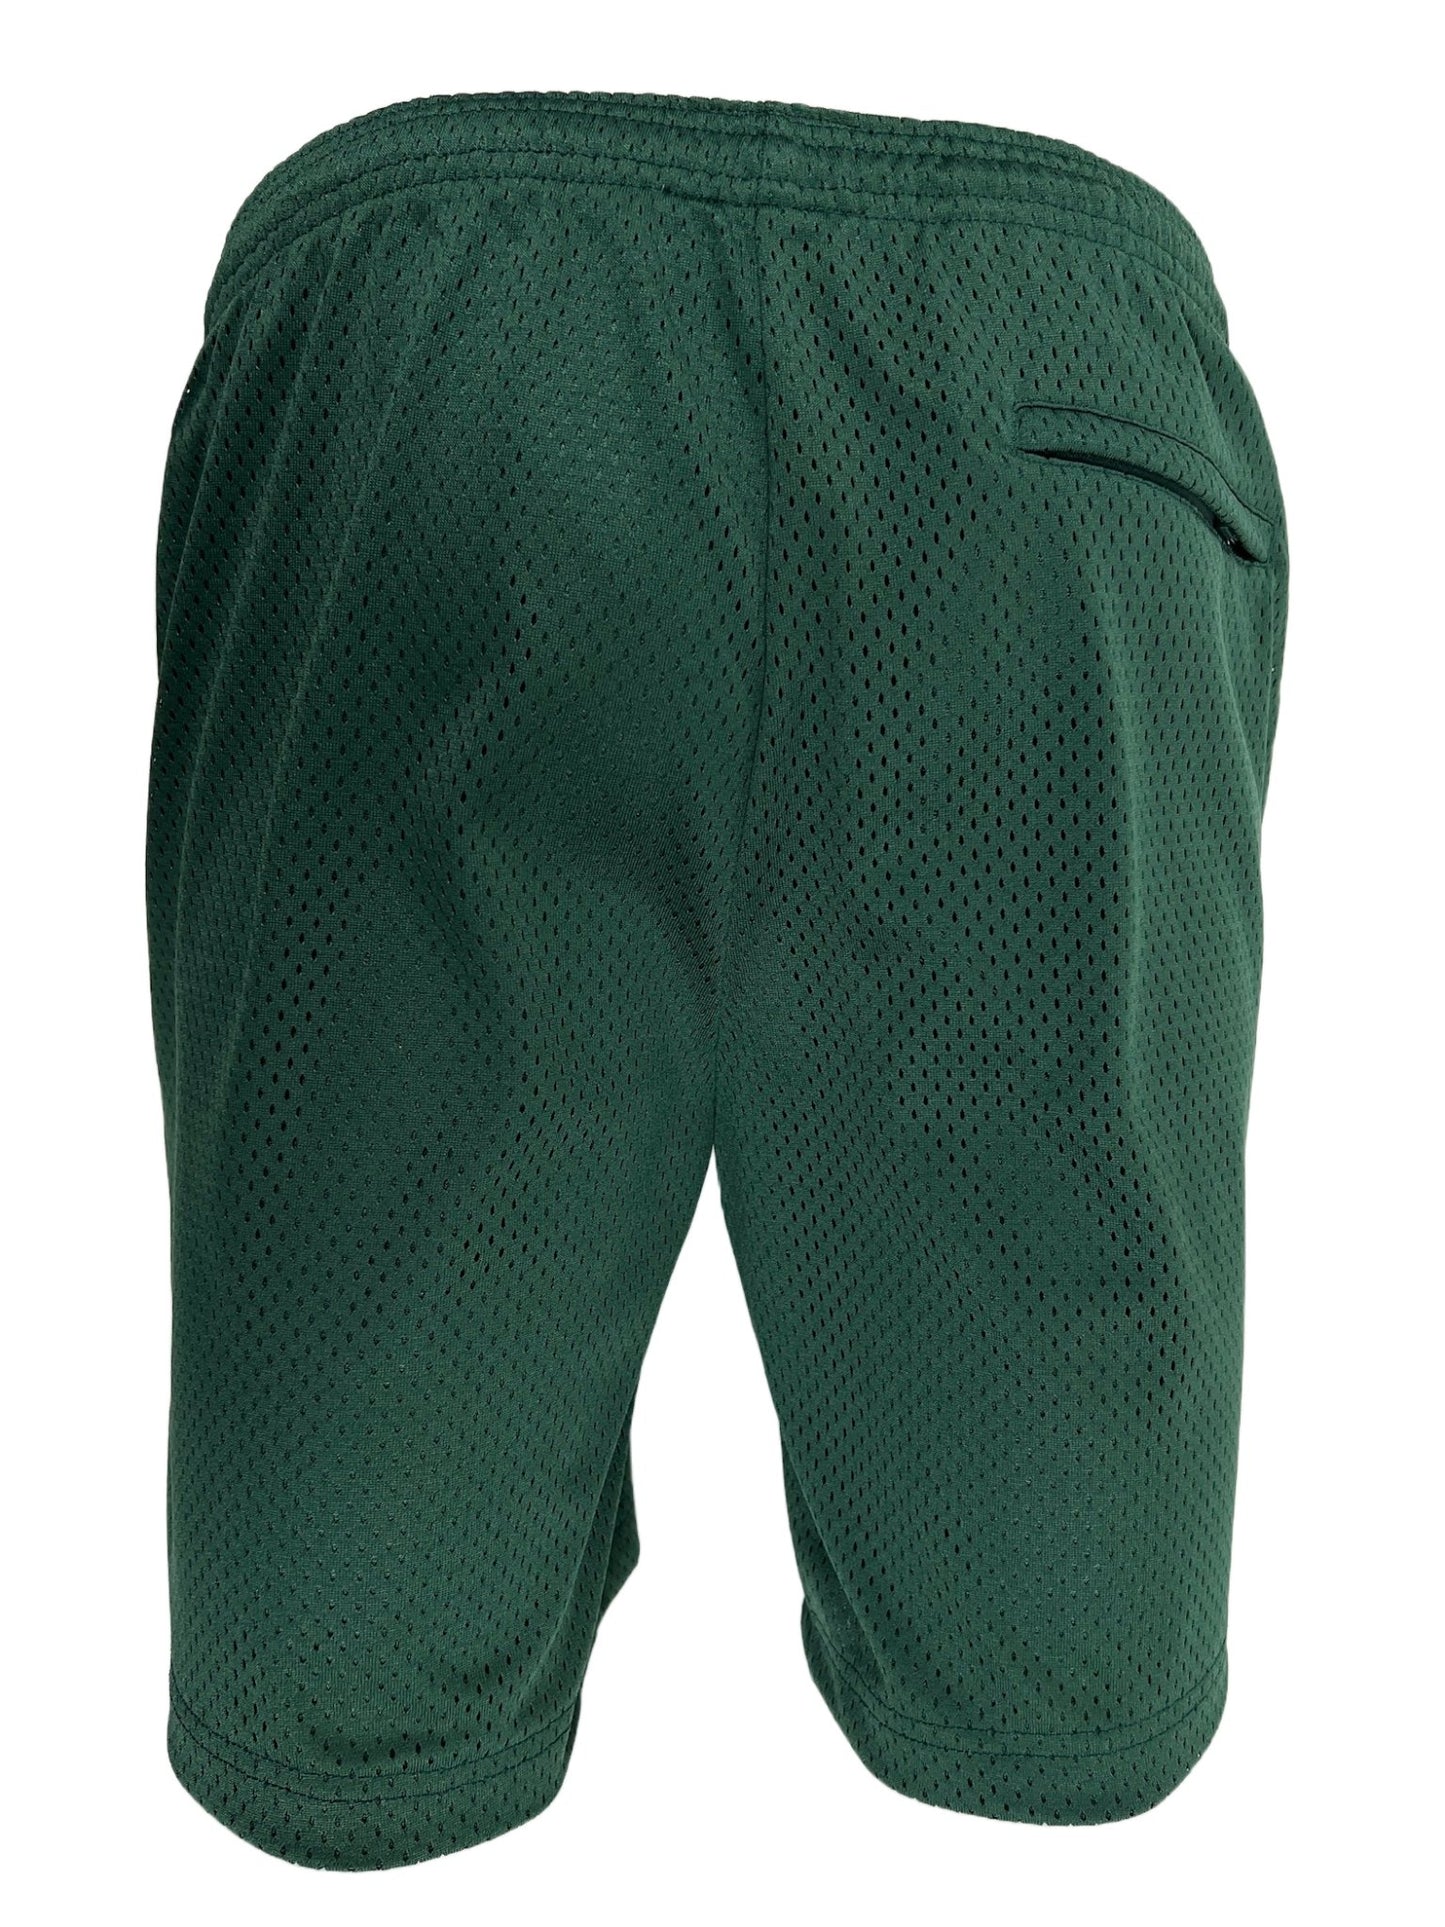 Probus YESTERDAY IS DEAD CORE MESH SHORTS OLIVE S